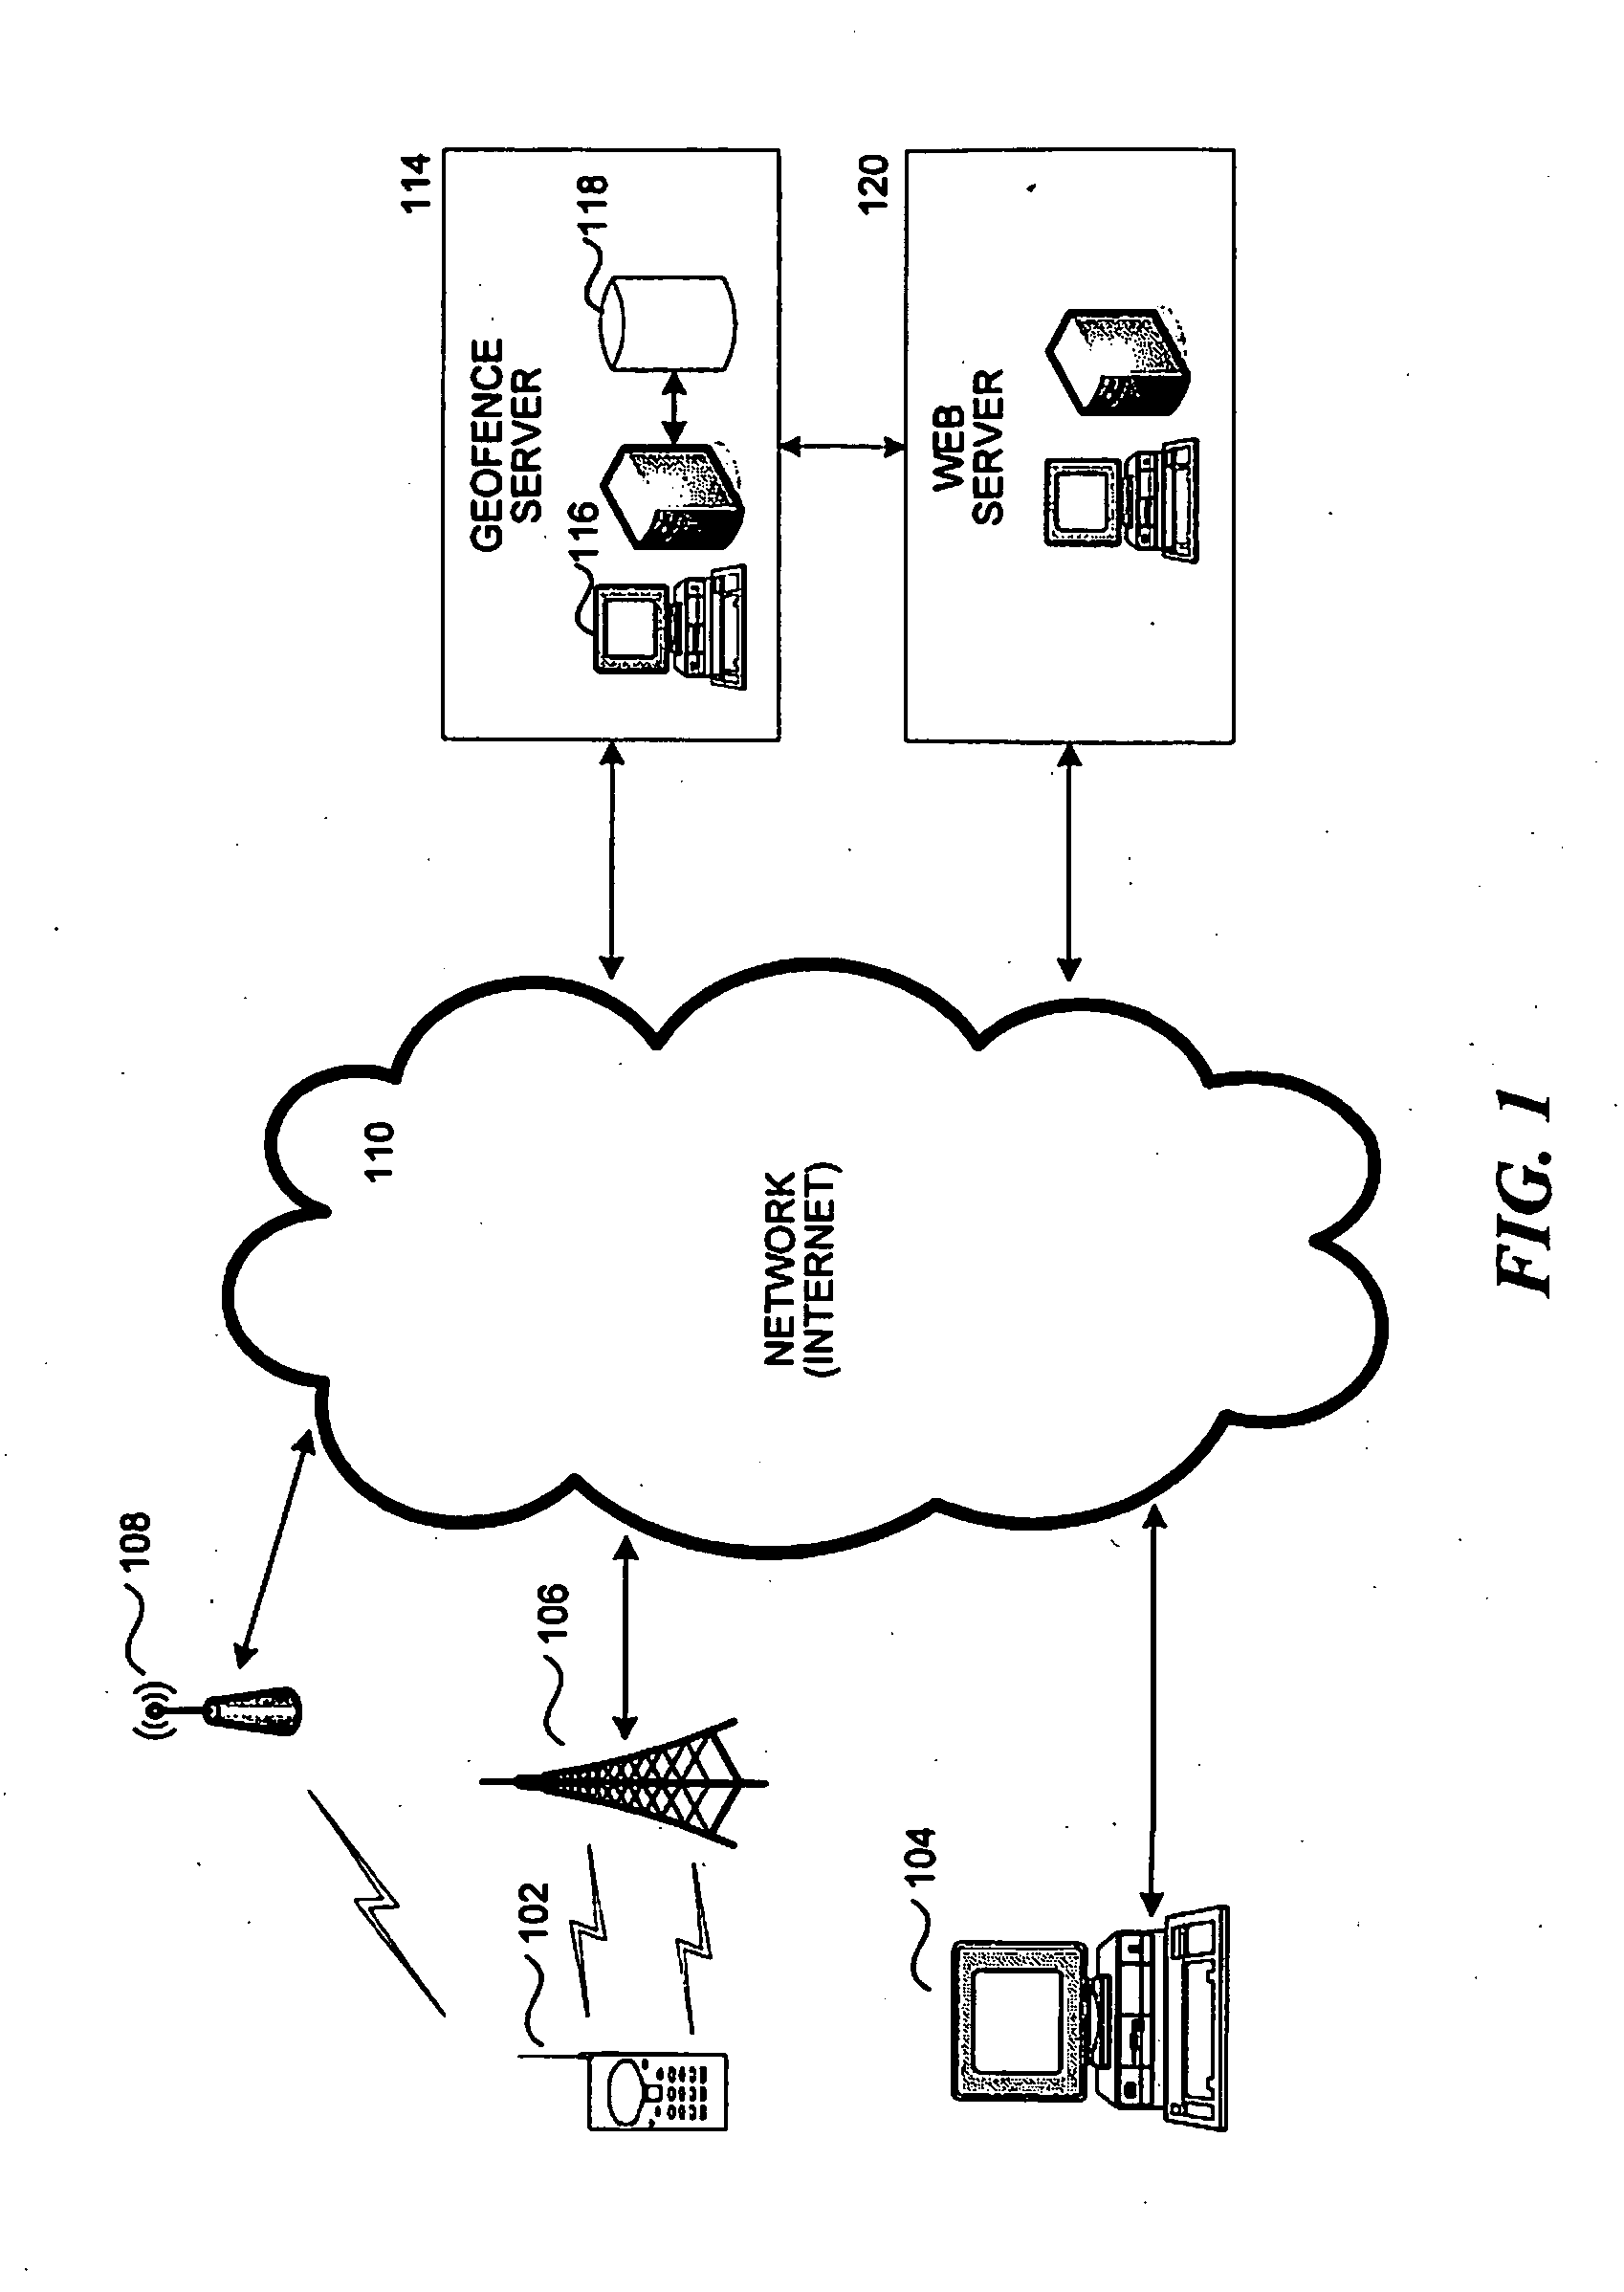 Use of geofences for location-based activation and control of services